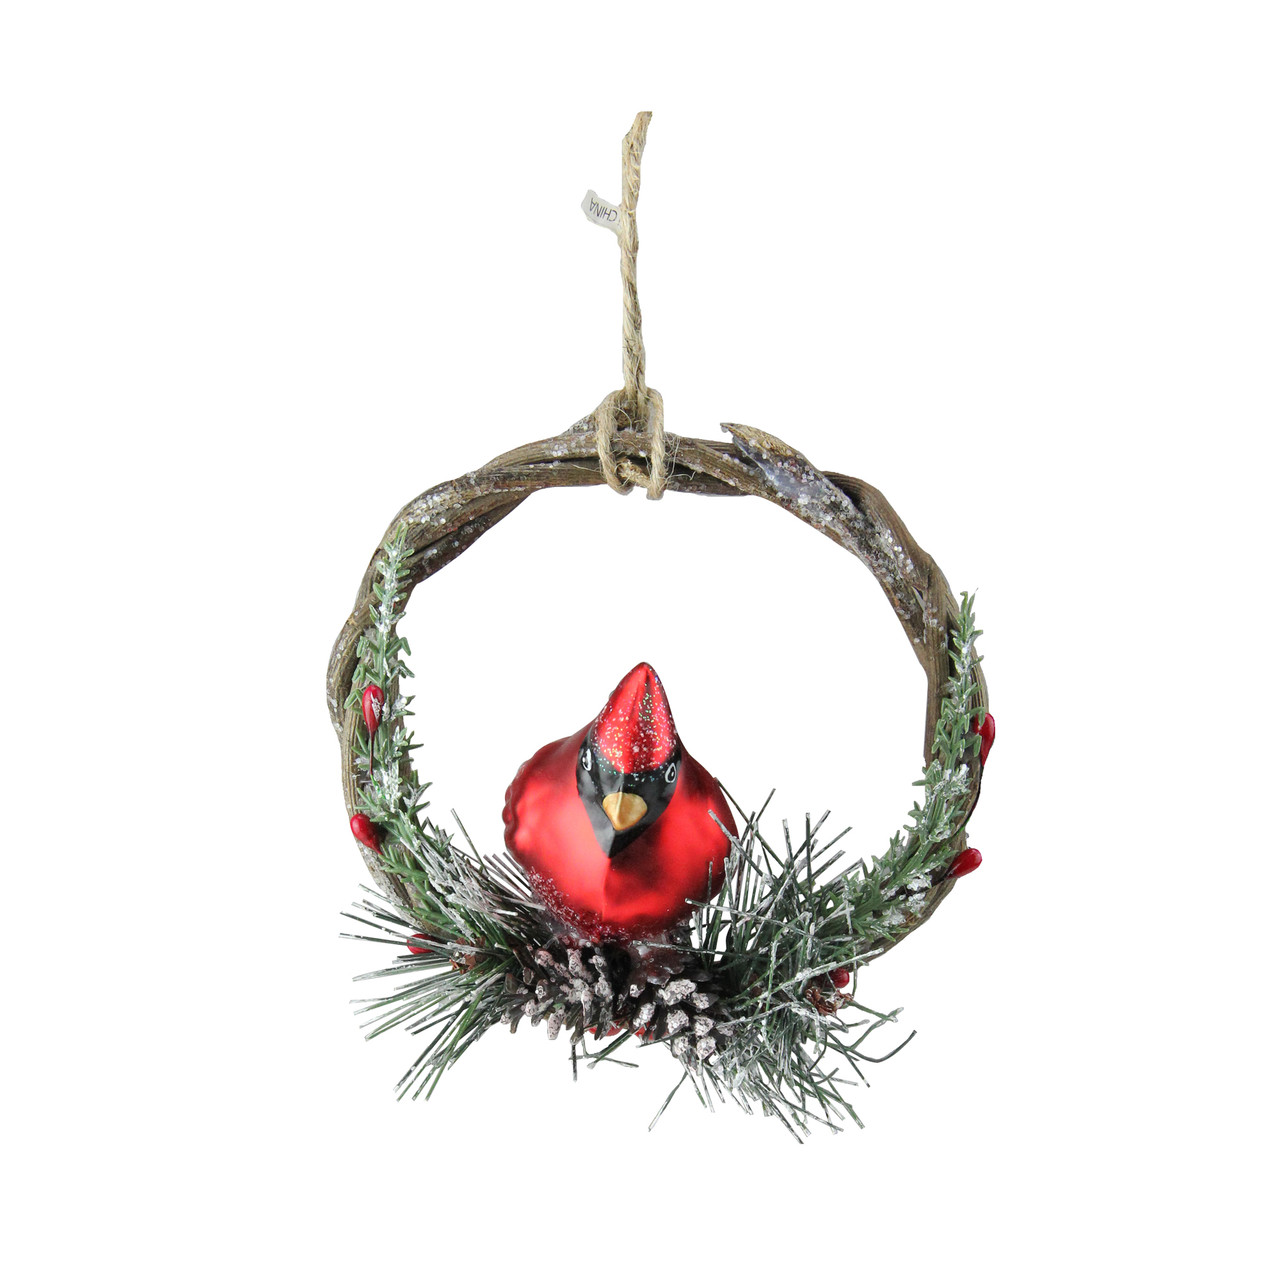 Cardinal Sitting in A Nest - Ornament